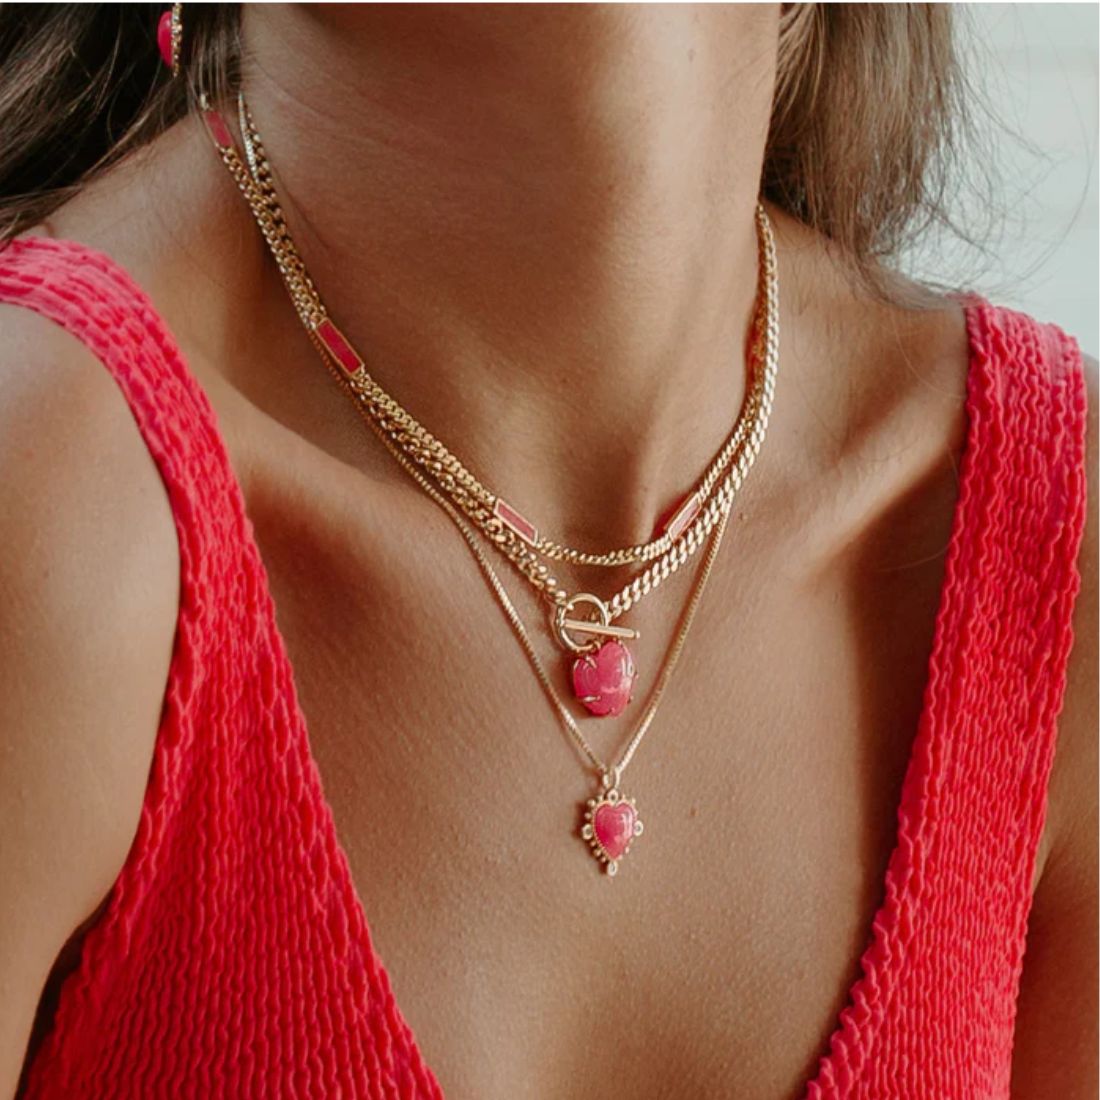 heavenly heart necklace in hot pink